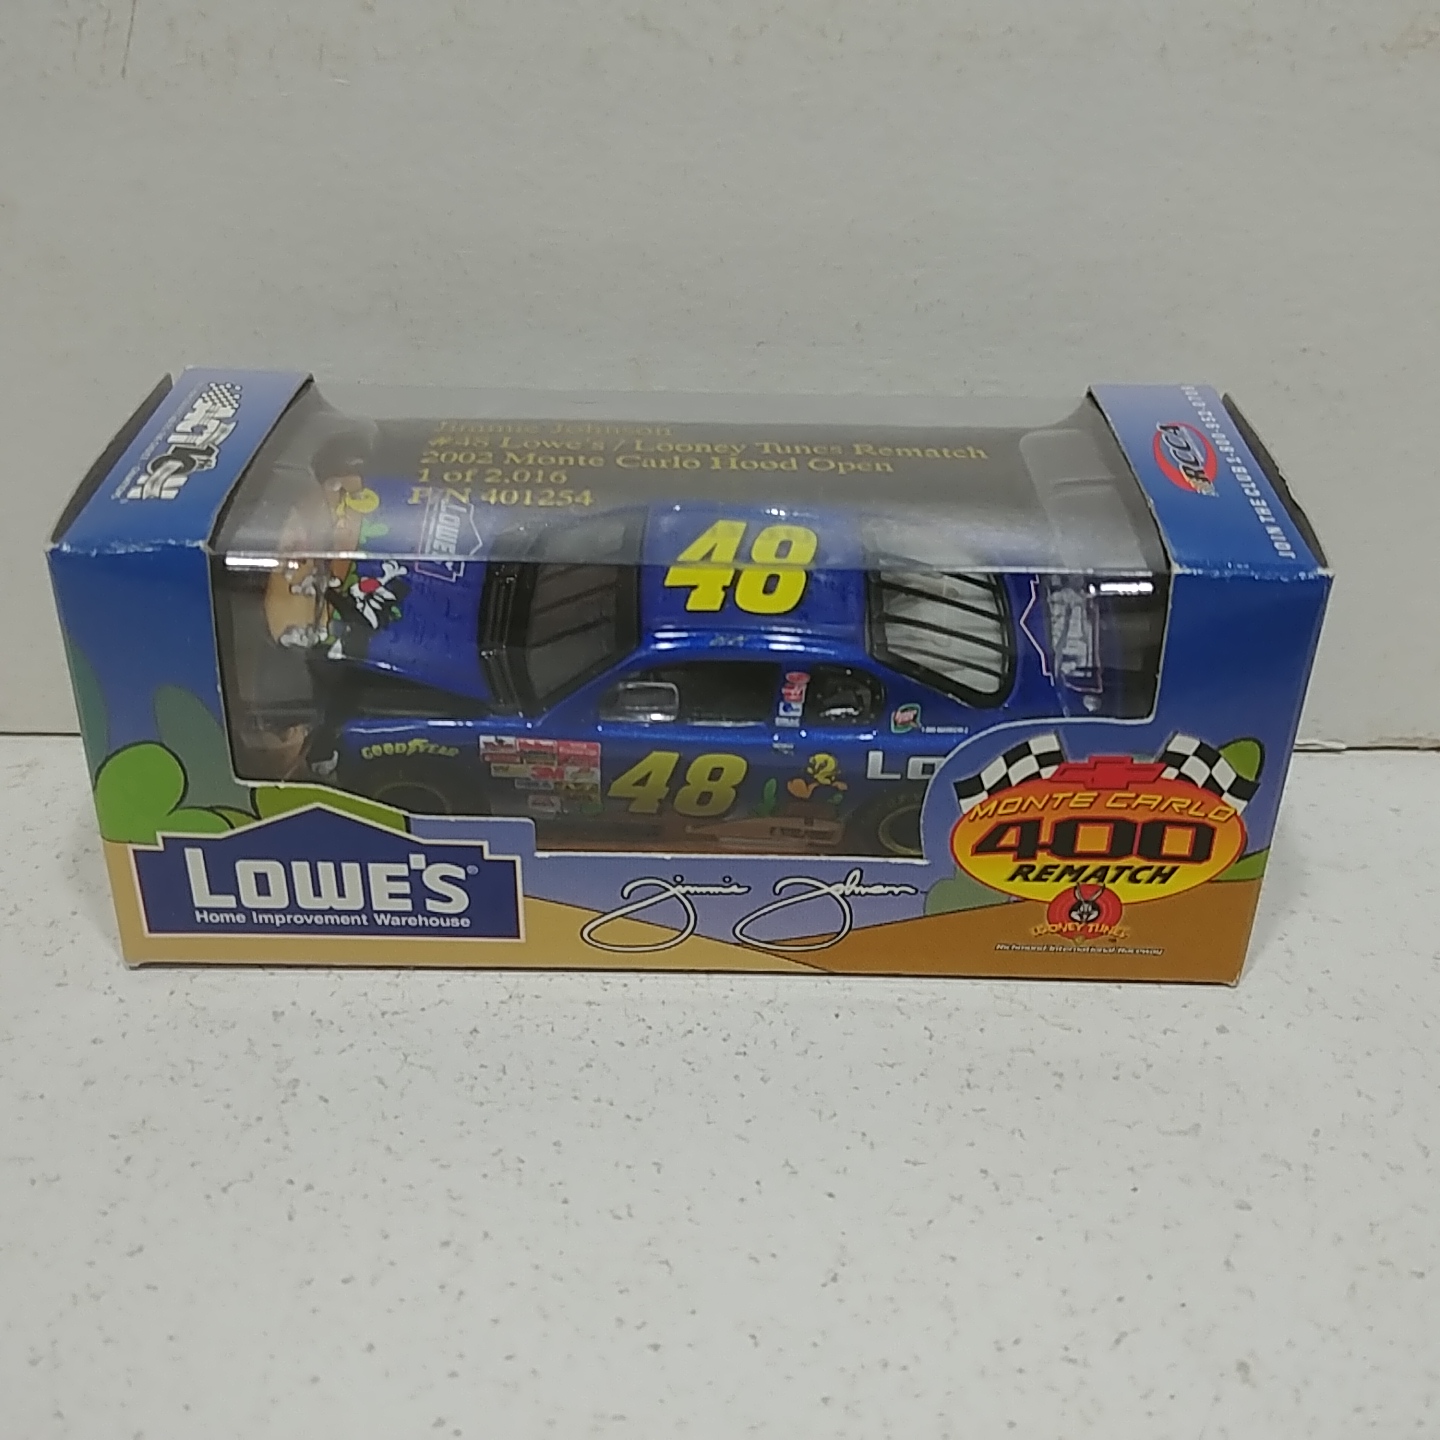 2002 Jimmie Johnson 1/64th Lowe's "Looney Tunes Sylvester and Tweety" RCCA hood open Monte Carlo